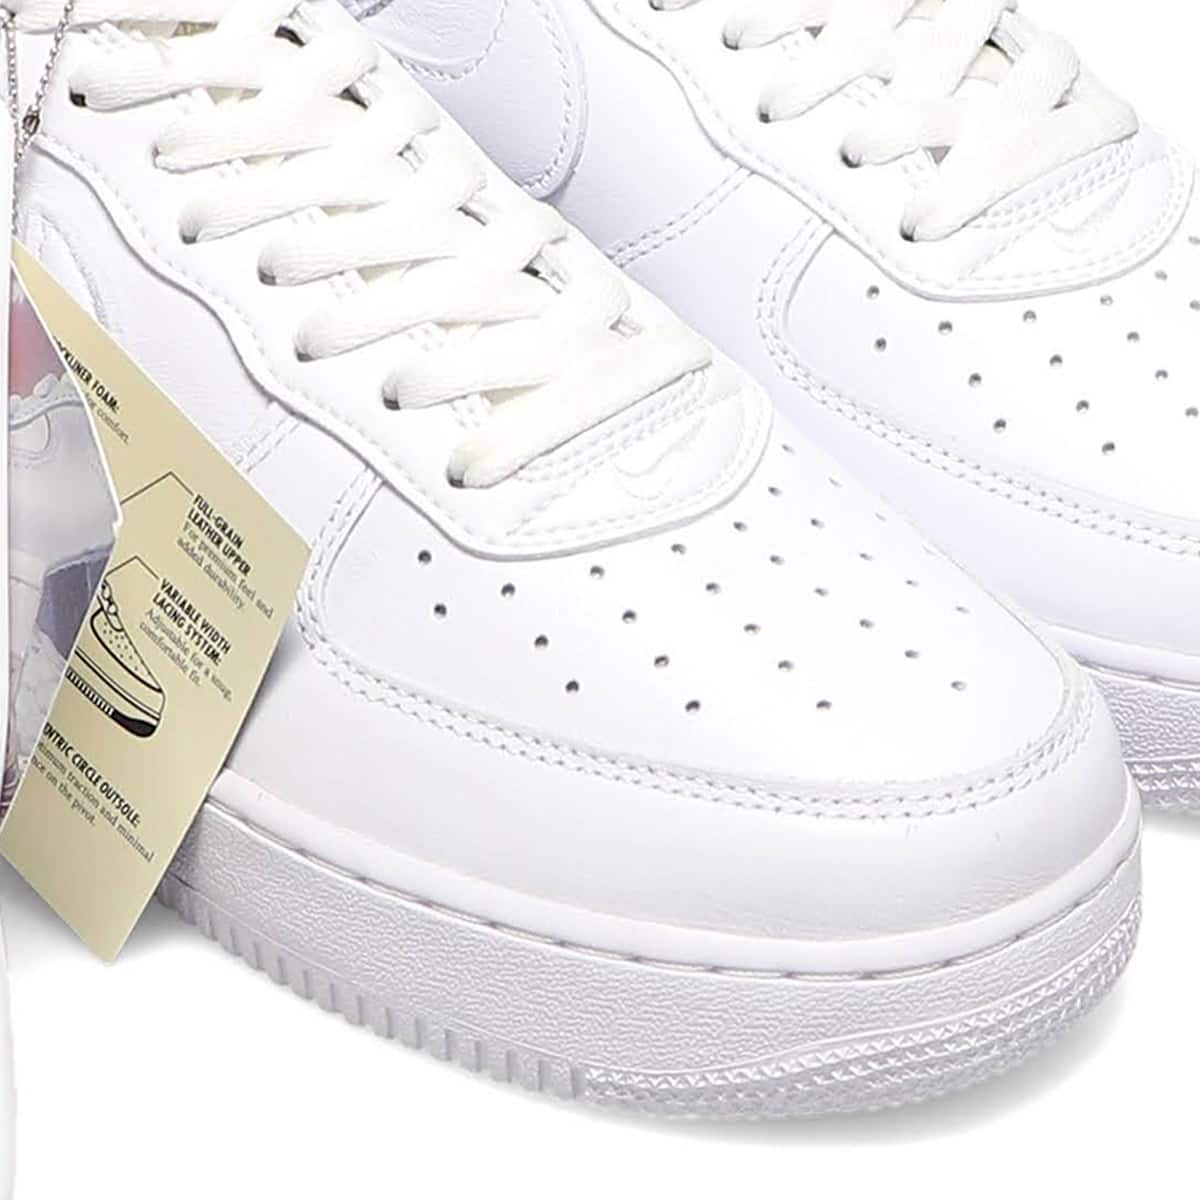 Nike Air Force 1 Low '07 "White" 27.5cm